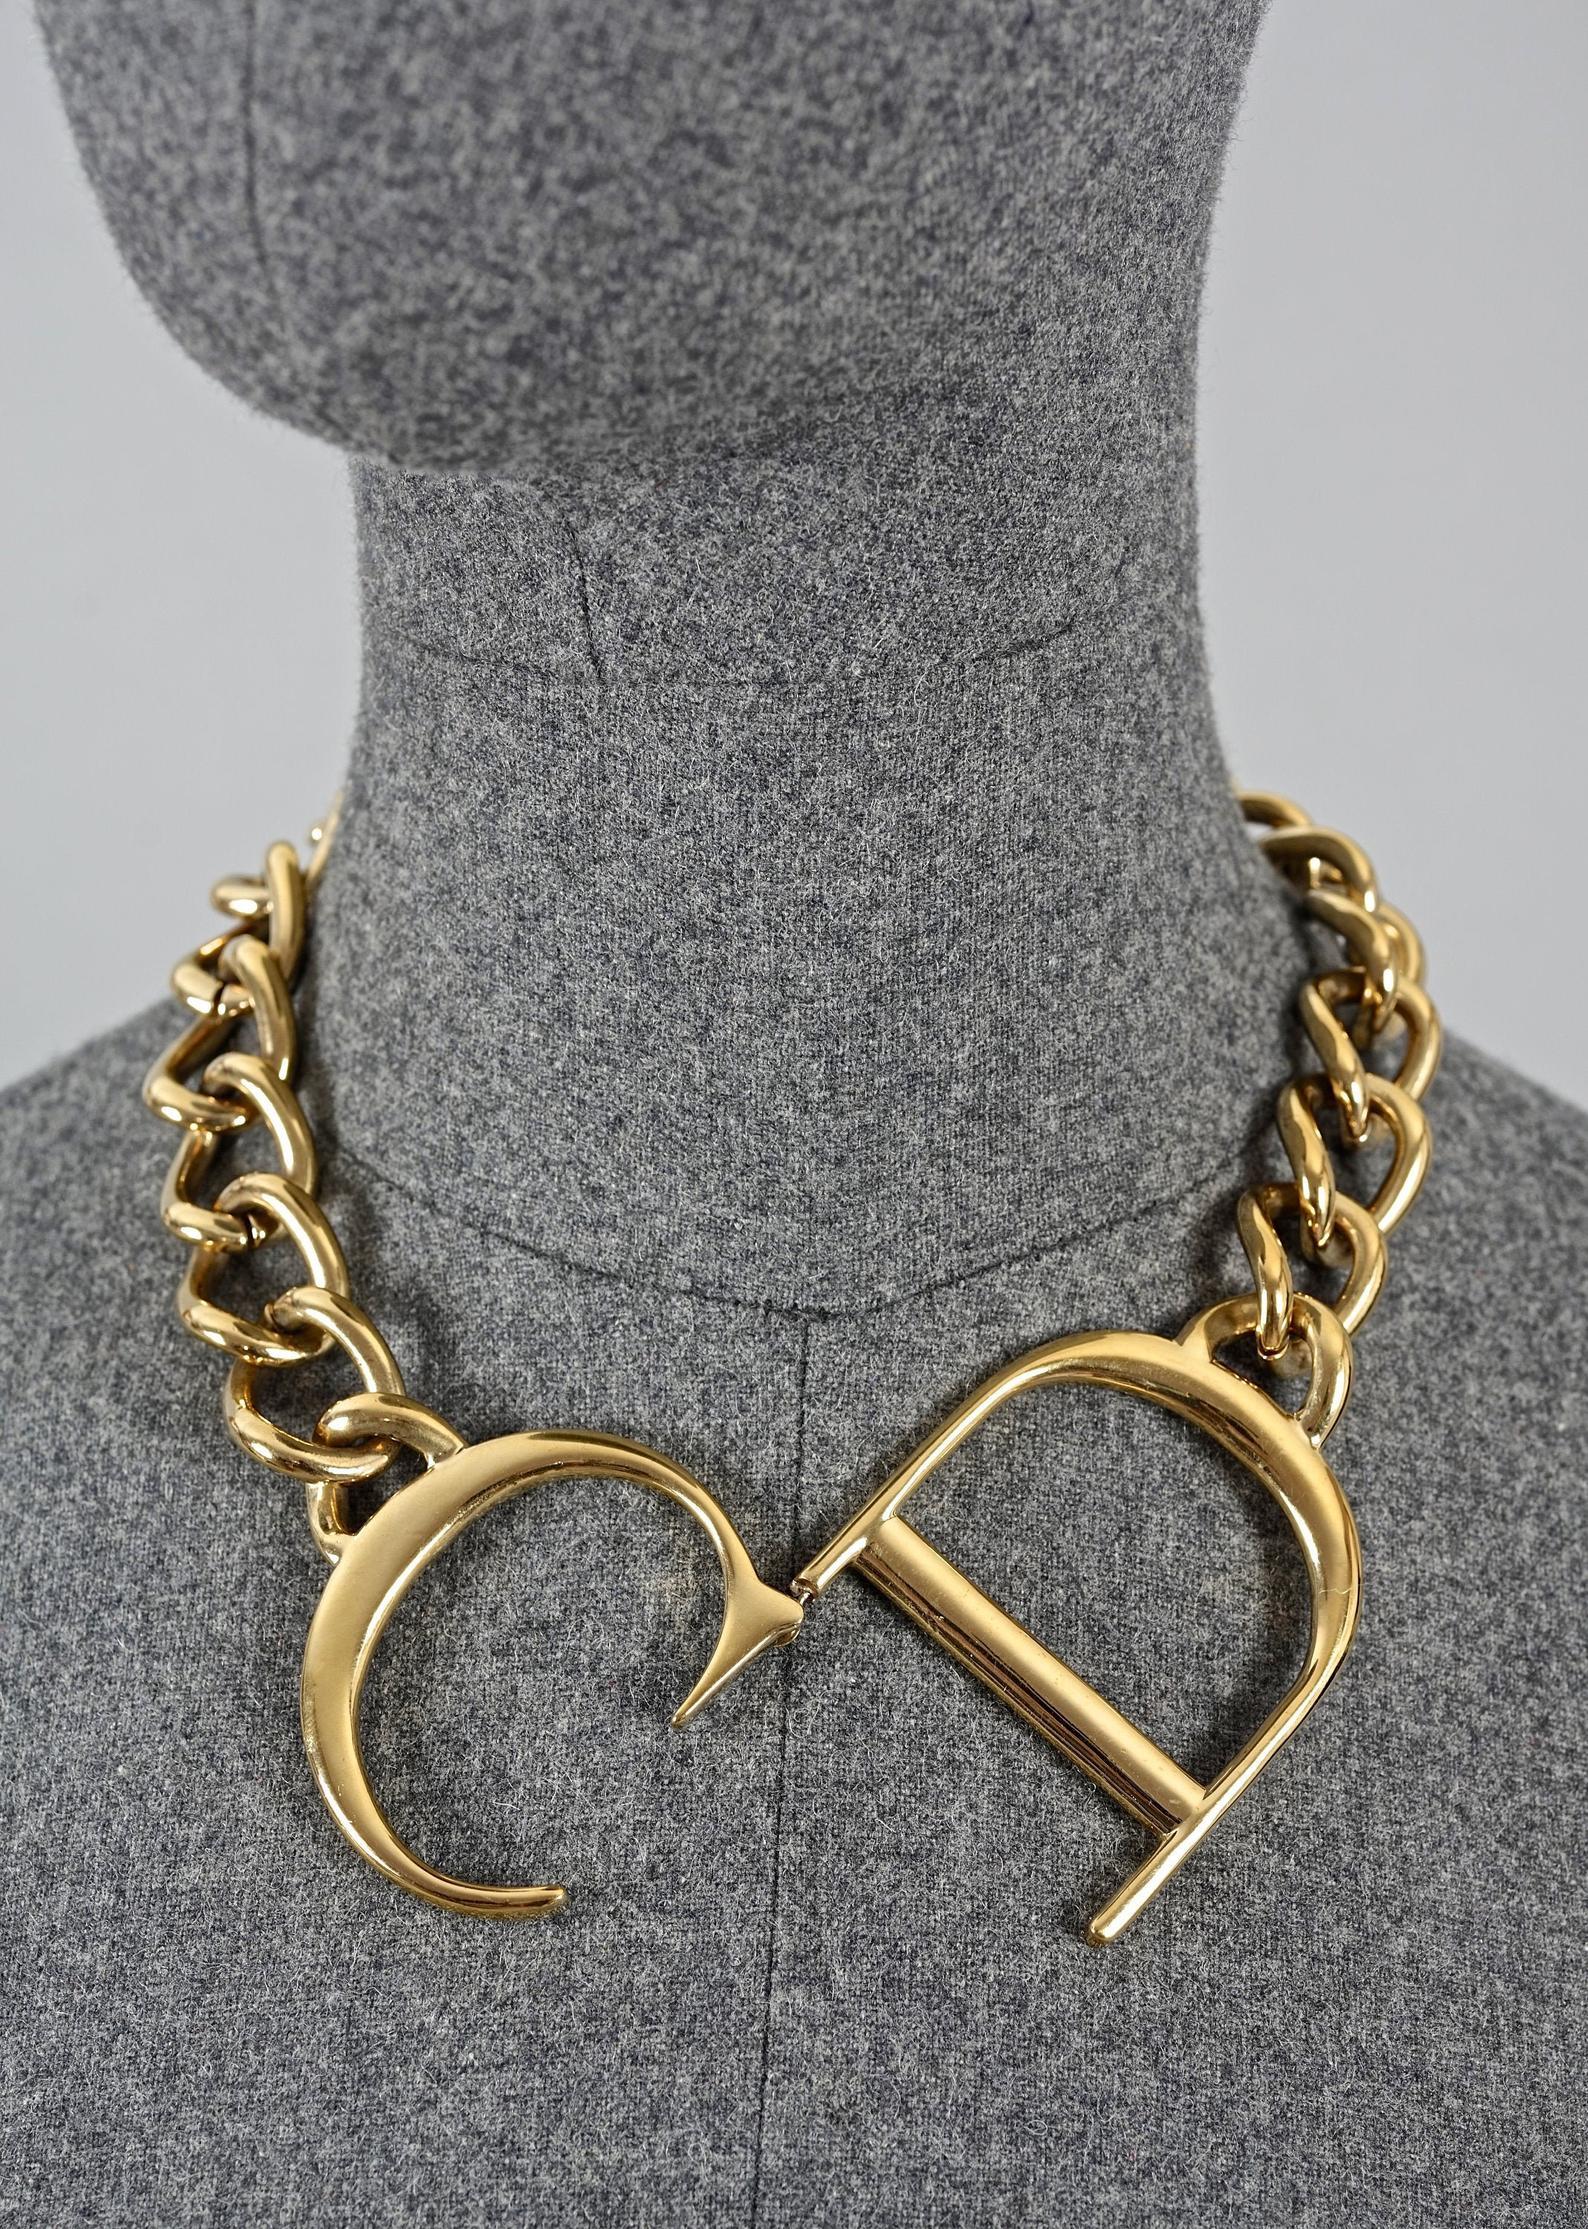 Vintage Massive CHRISTIAN DIOR by John Galliano Logo Monogram Chain Necklace

This is the bigger version same collection used in the Dior publicity. Very rare and almost impossible to find.

Measurements:
Centrepiece Height: 2.16 inches  (5.5